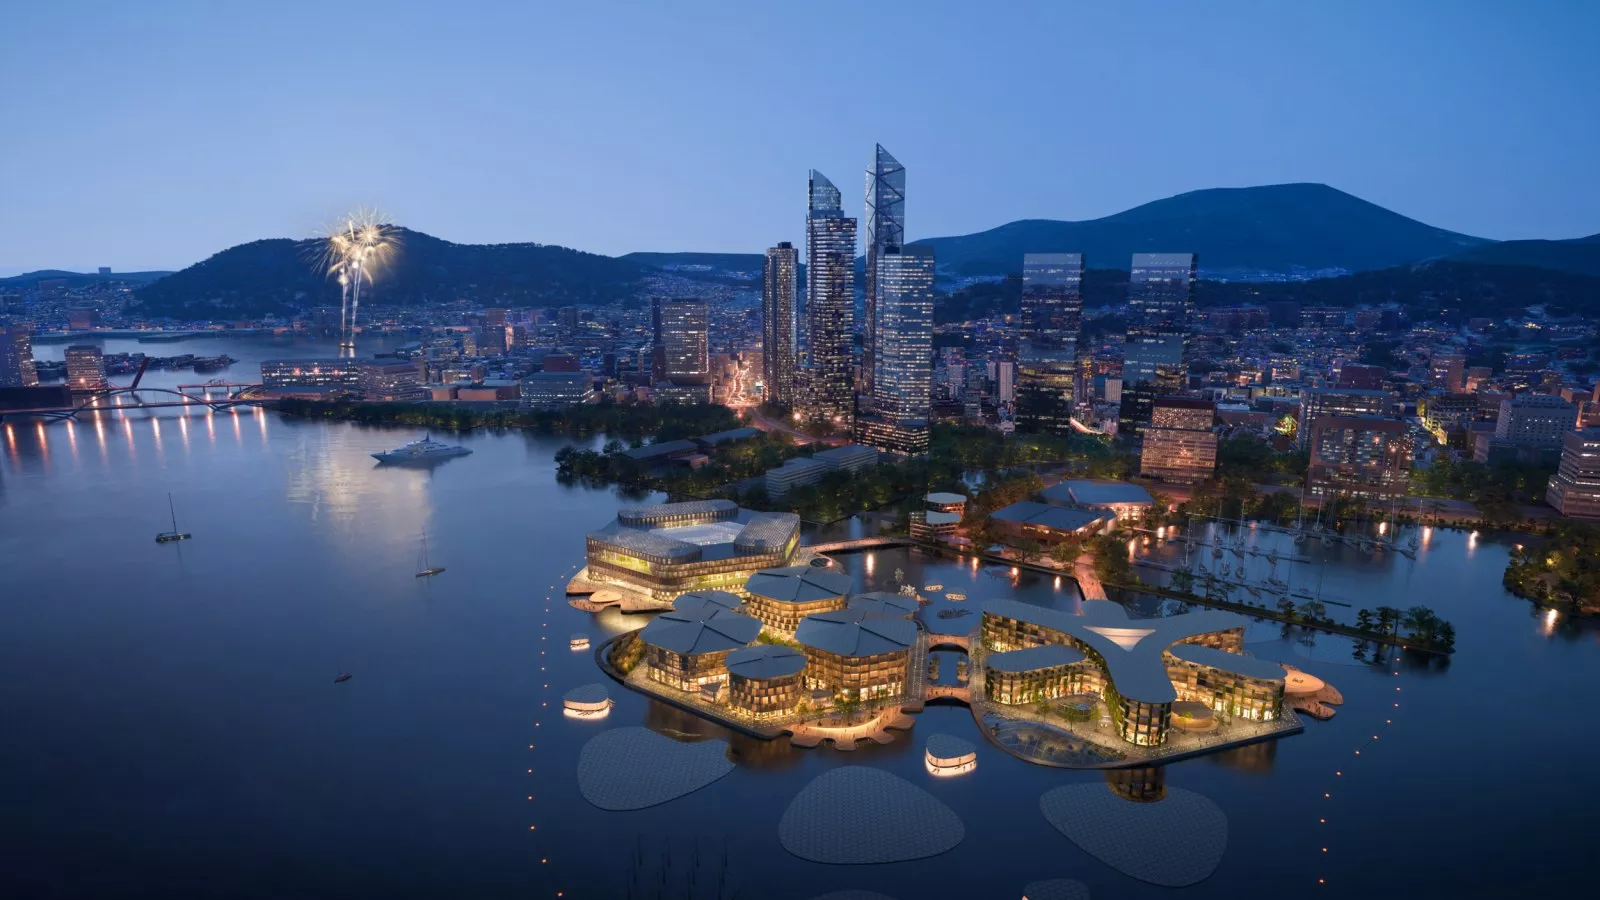 South Korea’s Oceanix Busan—all we know about world’s first floating city